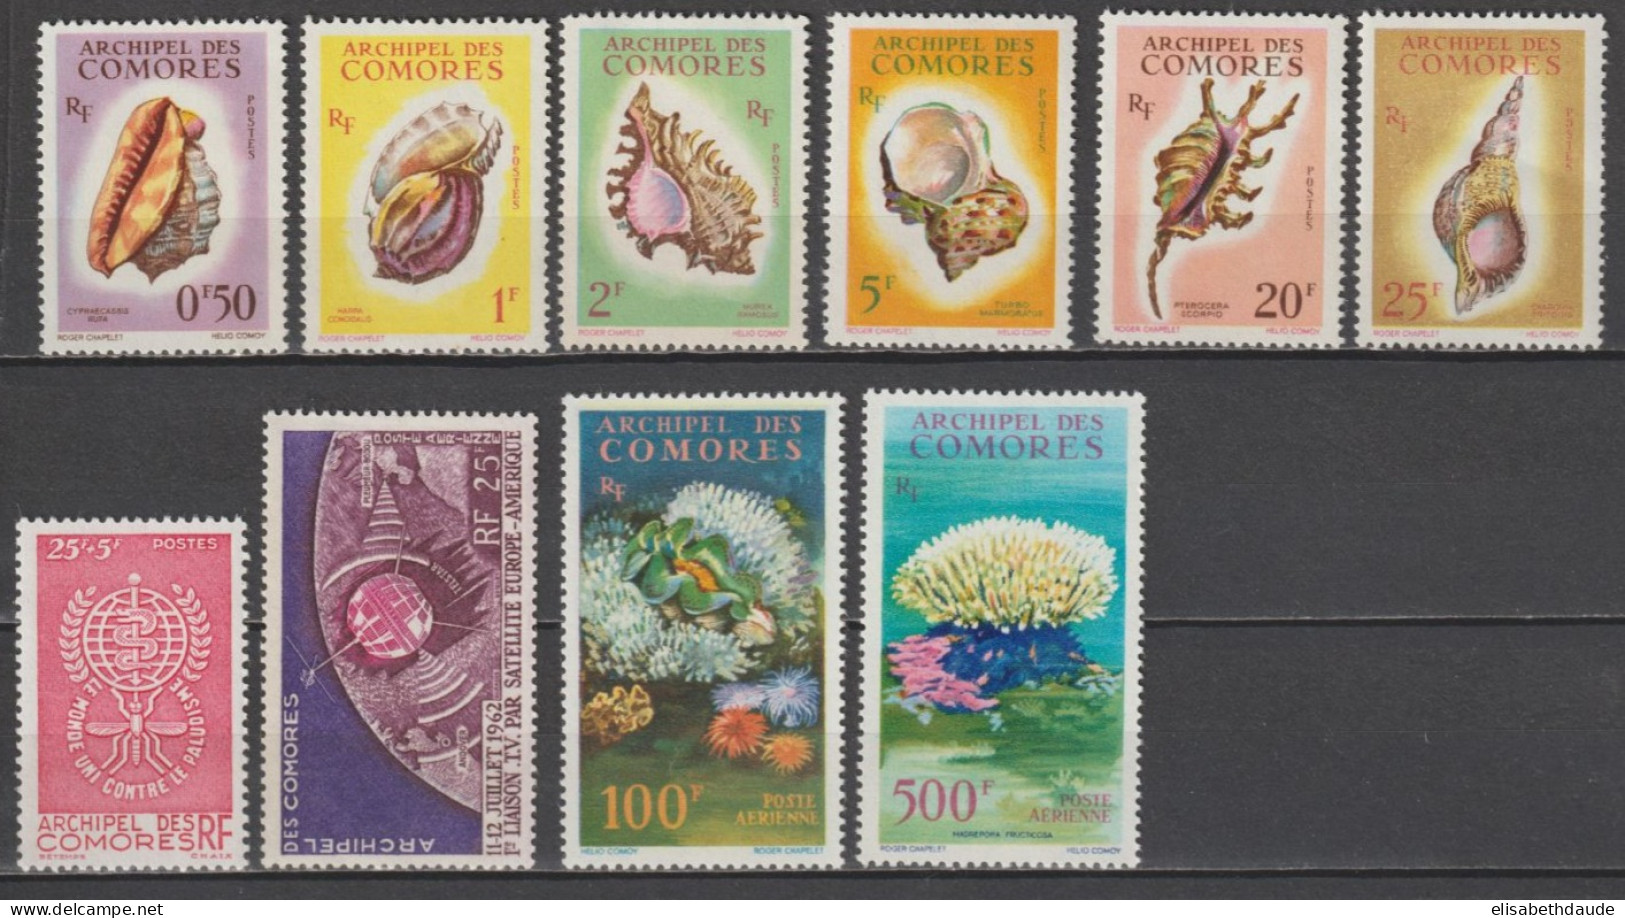 COMORES - 1962 - ANNEE COMPLETE Avec POSTE AERIENNE - YVERT N°19/25 ** MNH + A5/7 * MLH  - COTE = 87 EUR. - Unused Stamps